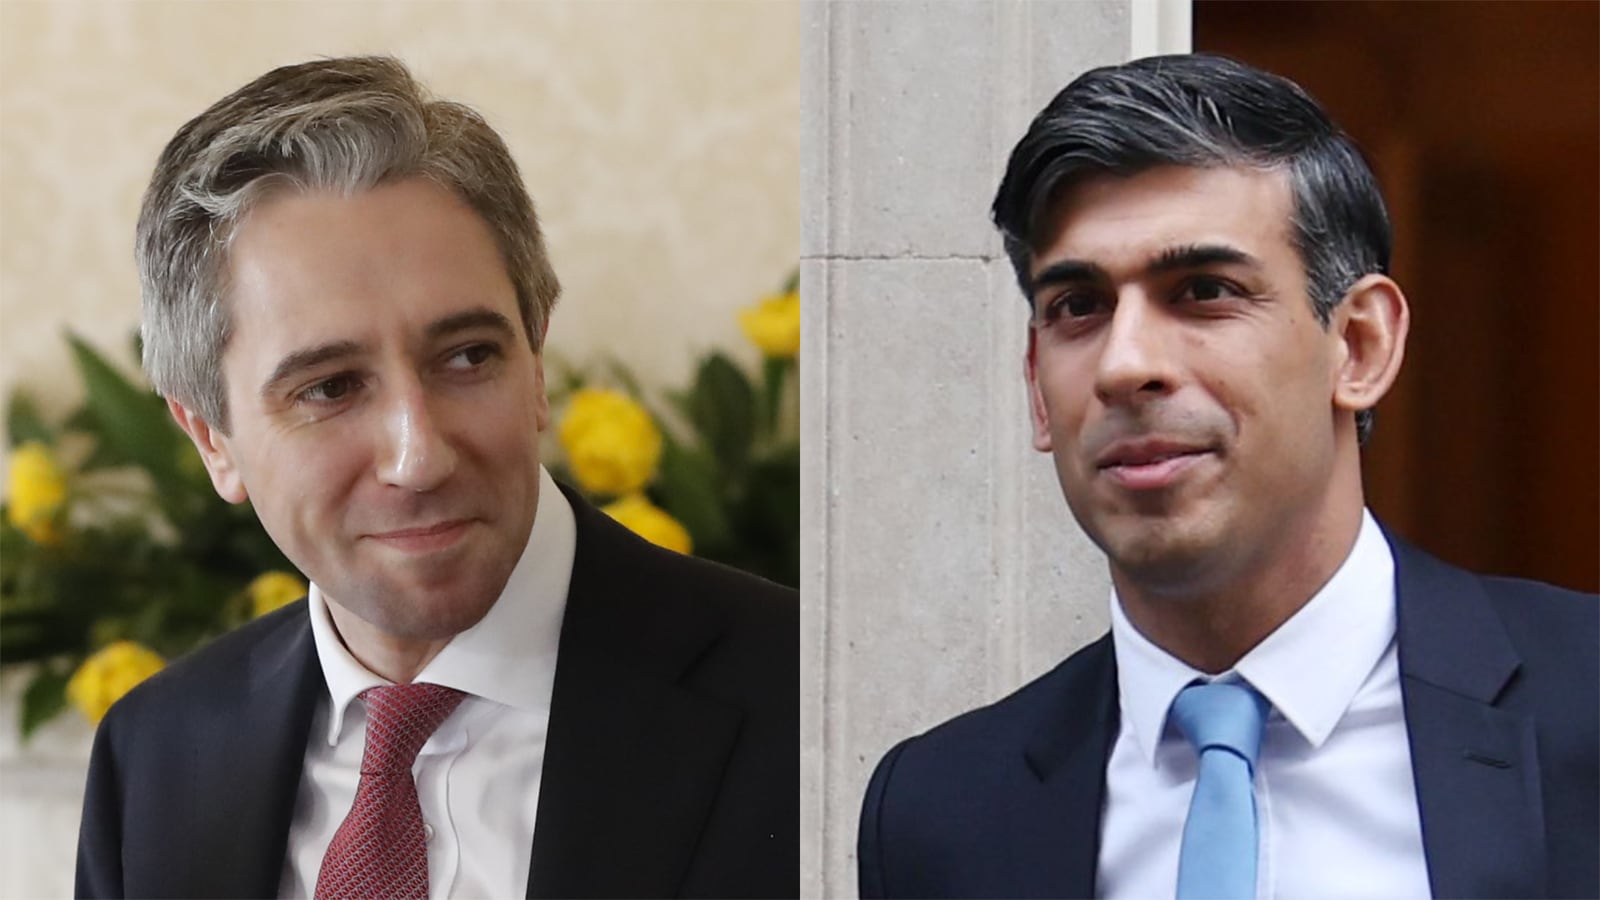 Taoiseach Simon Harris and British prime minister Rishi Sunak (right). Photographs: Damien Storan/PA, Andy Rain/EPA
composite picture collage side by side